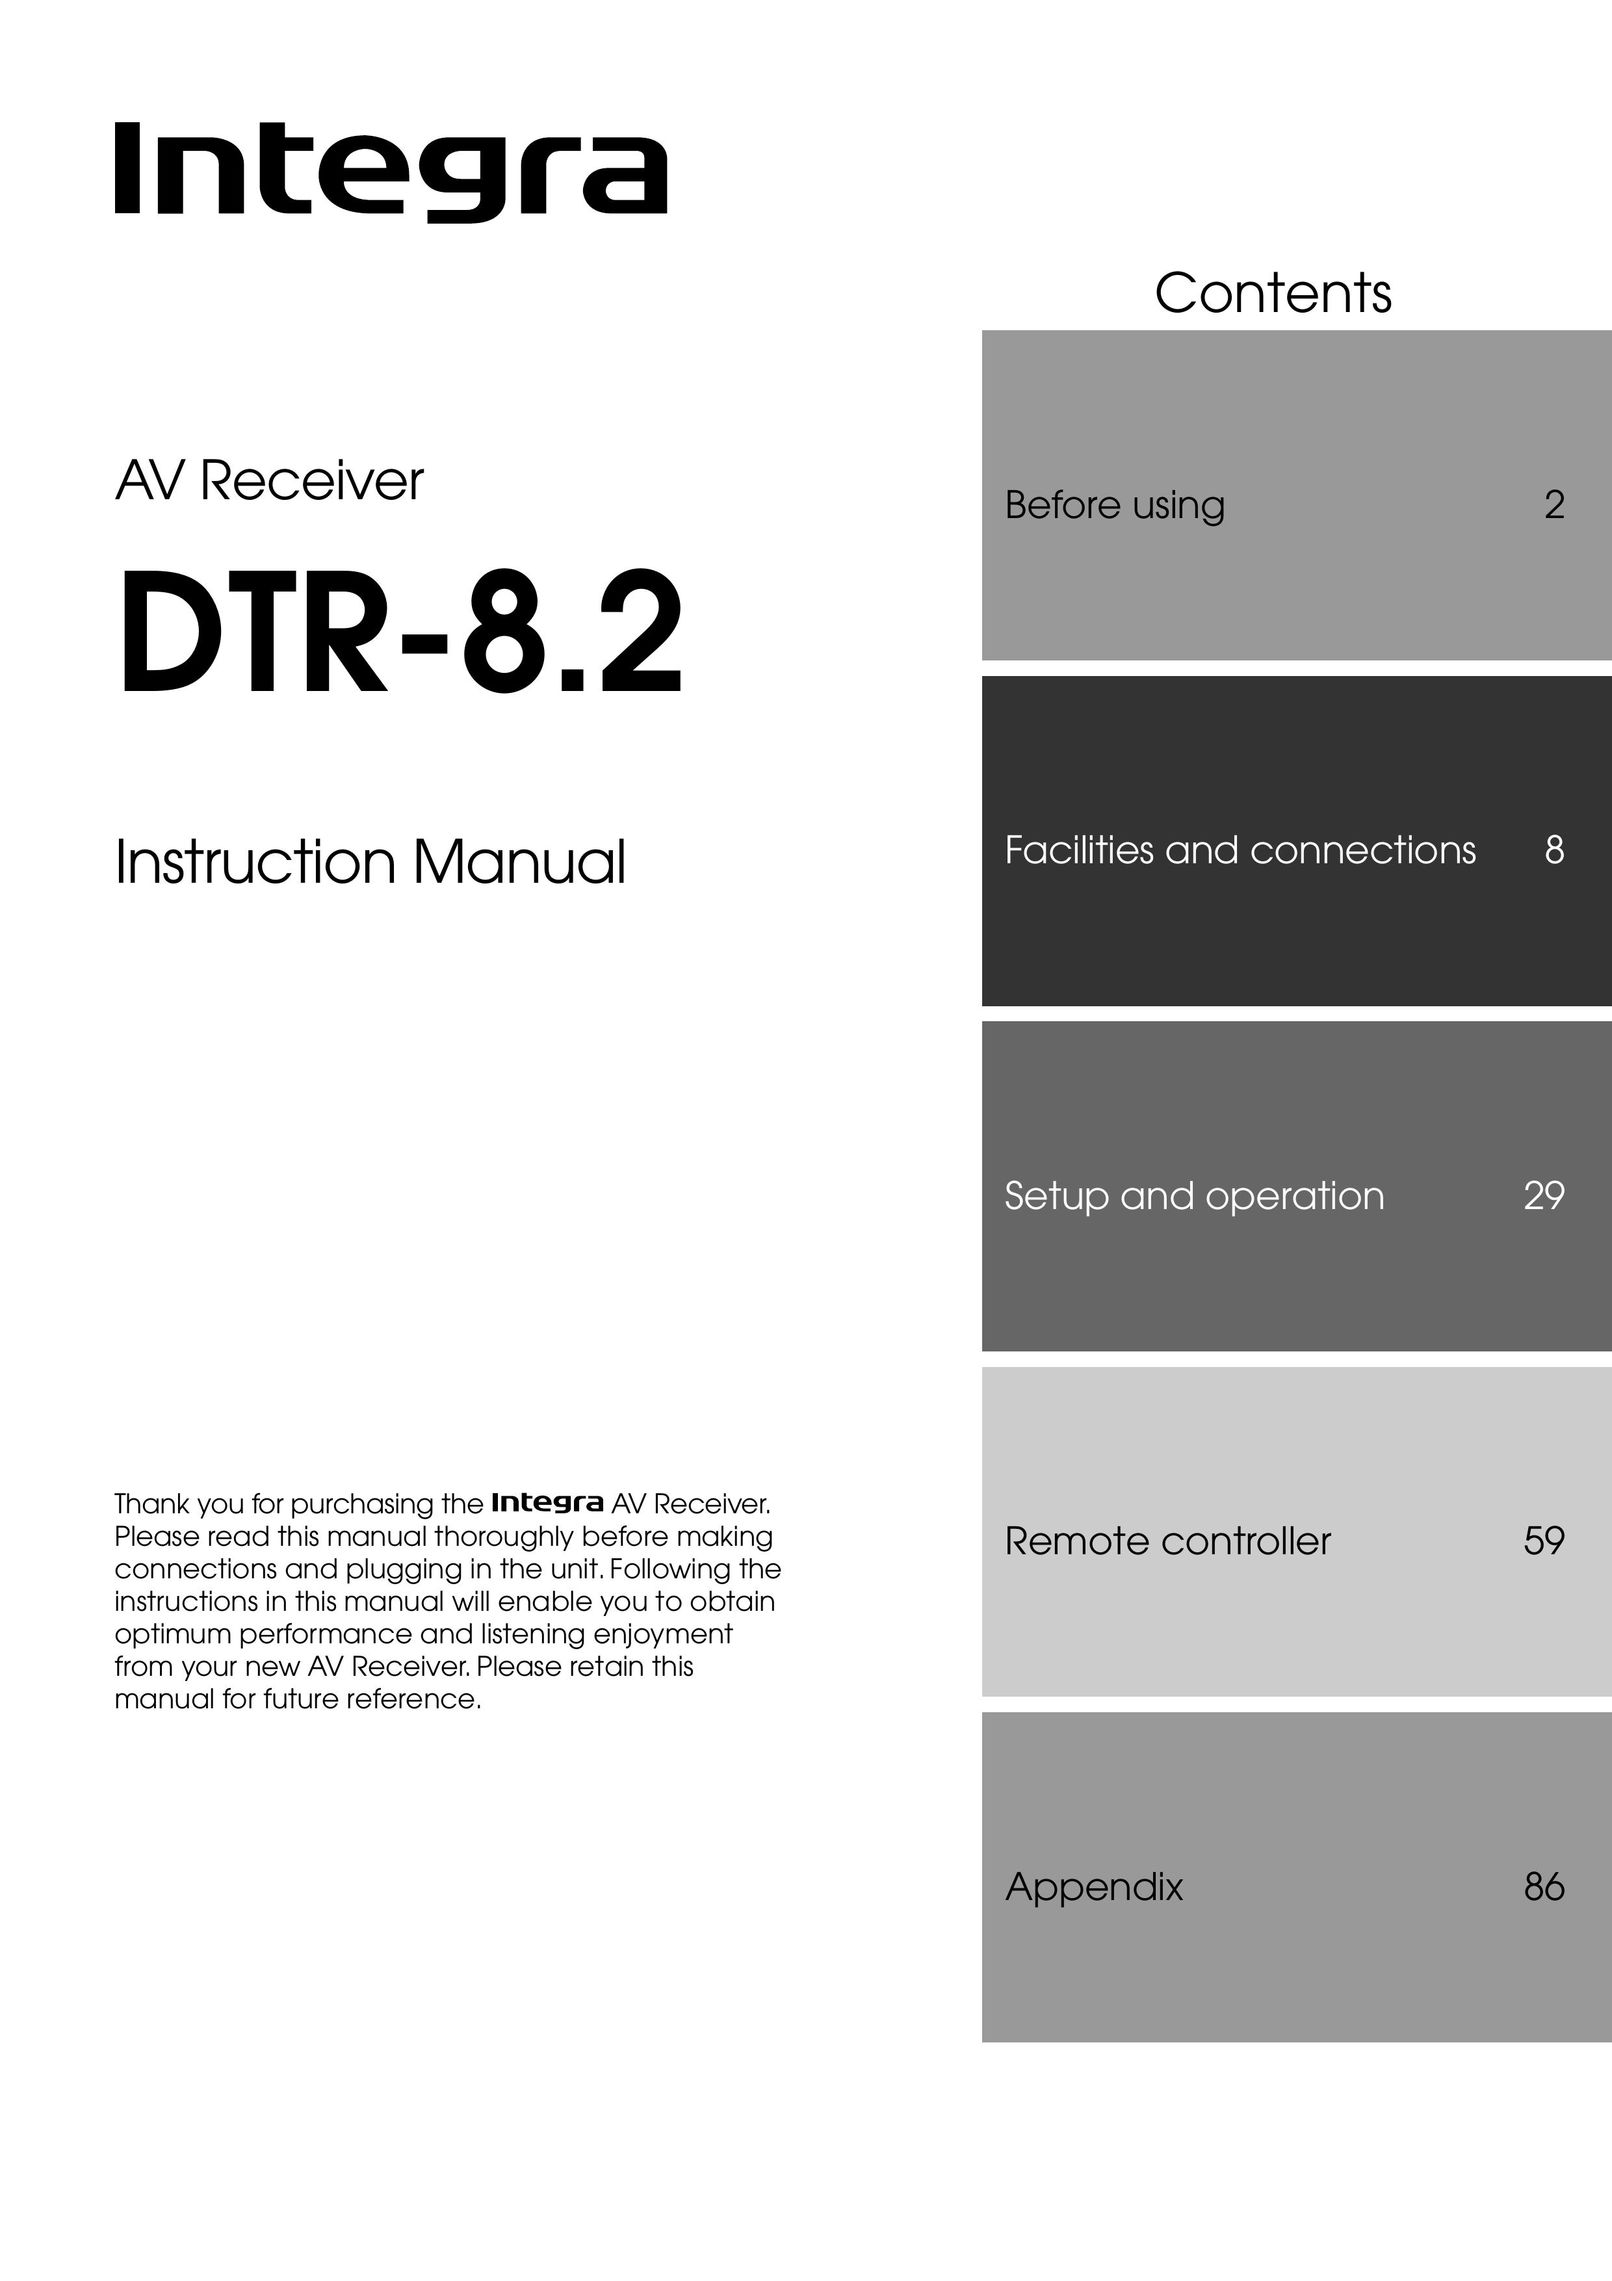 Integra DTR-8.2 Stereo Receiver User Manual (Page 1)